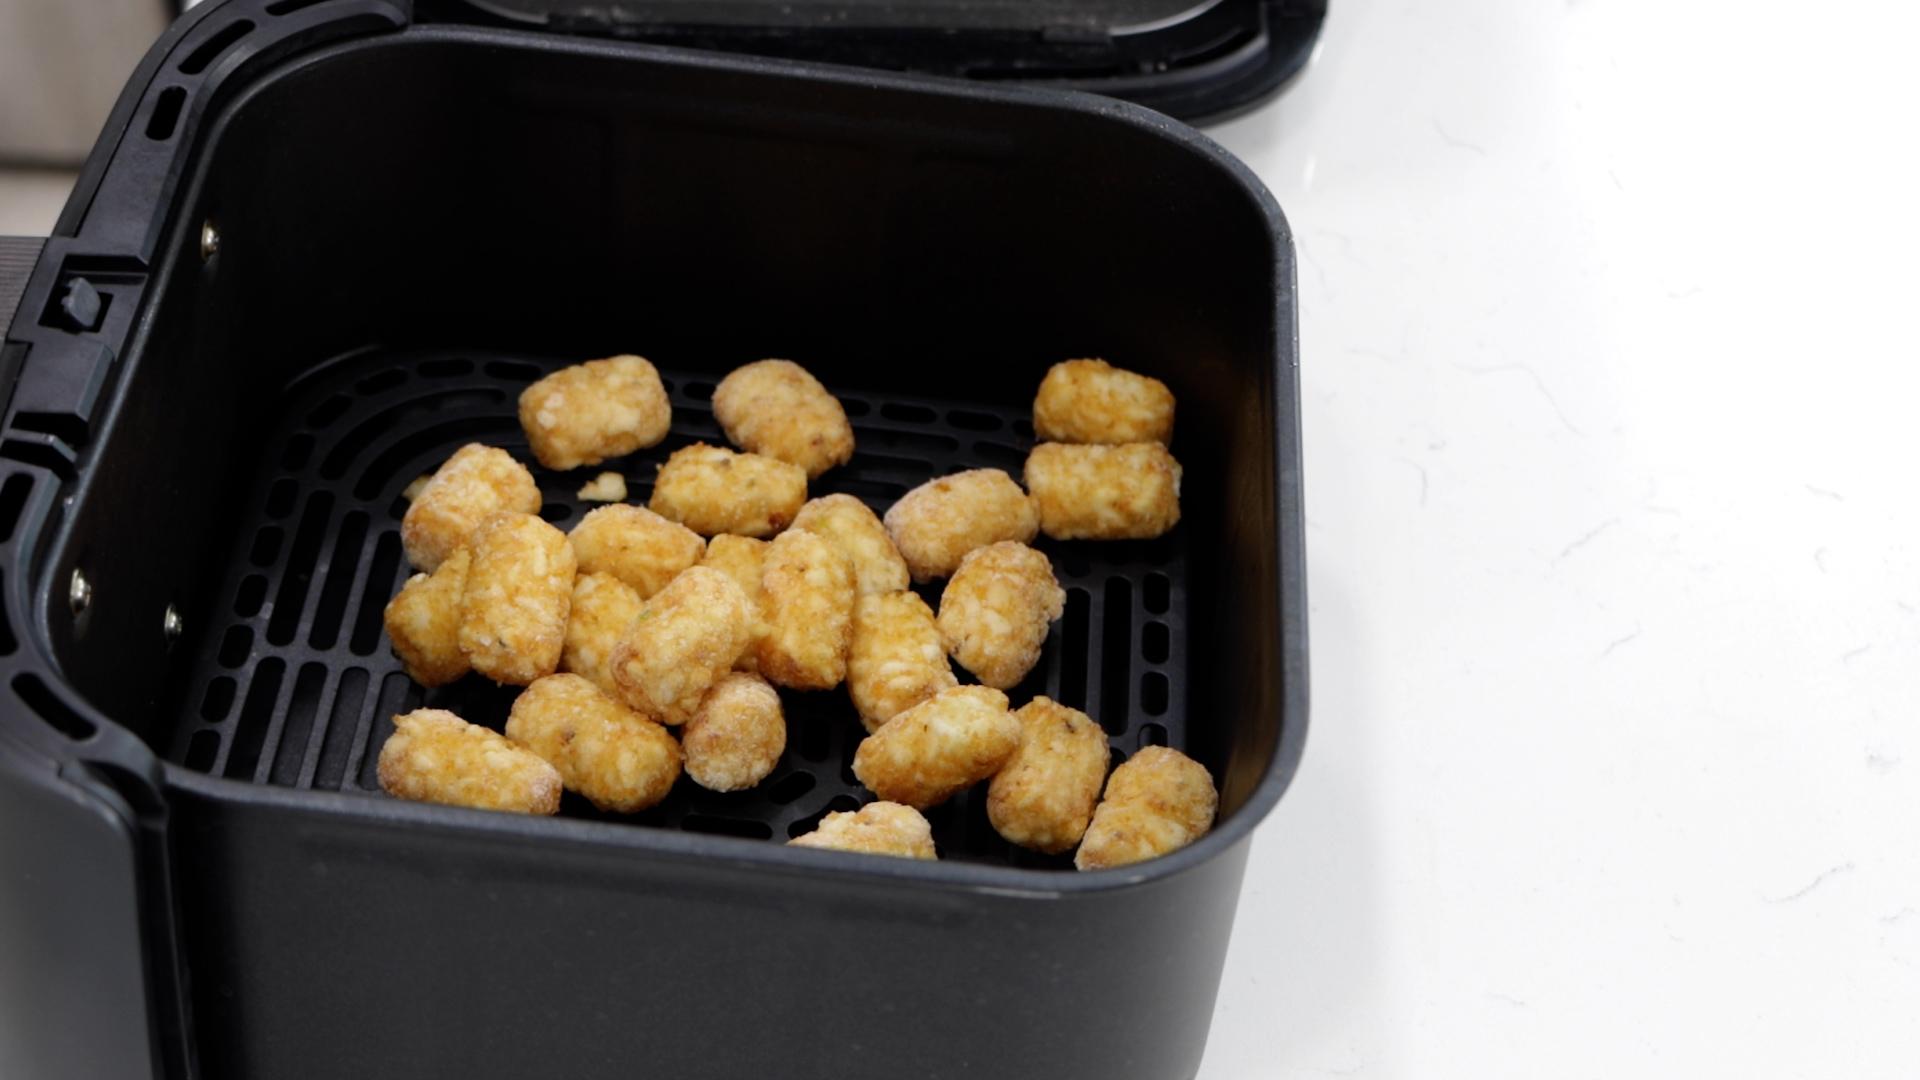 How to cook frozen tater tots in air fryer Copy 01.00_00_40_04.Still002.jpg